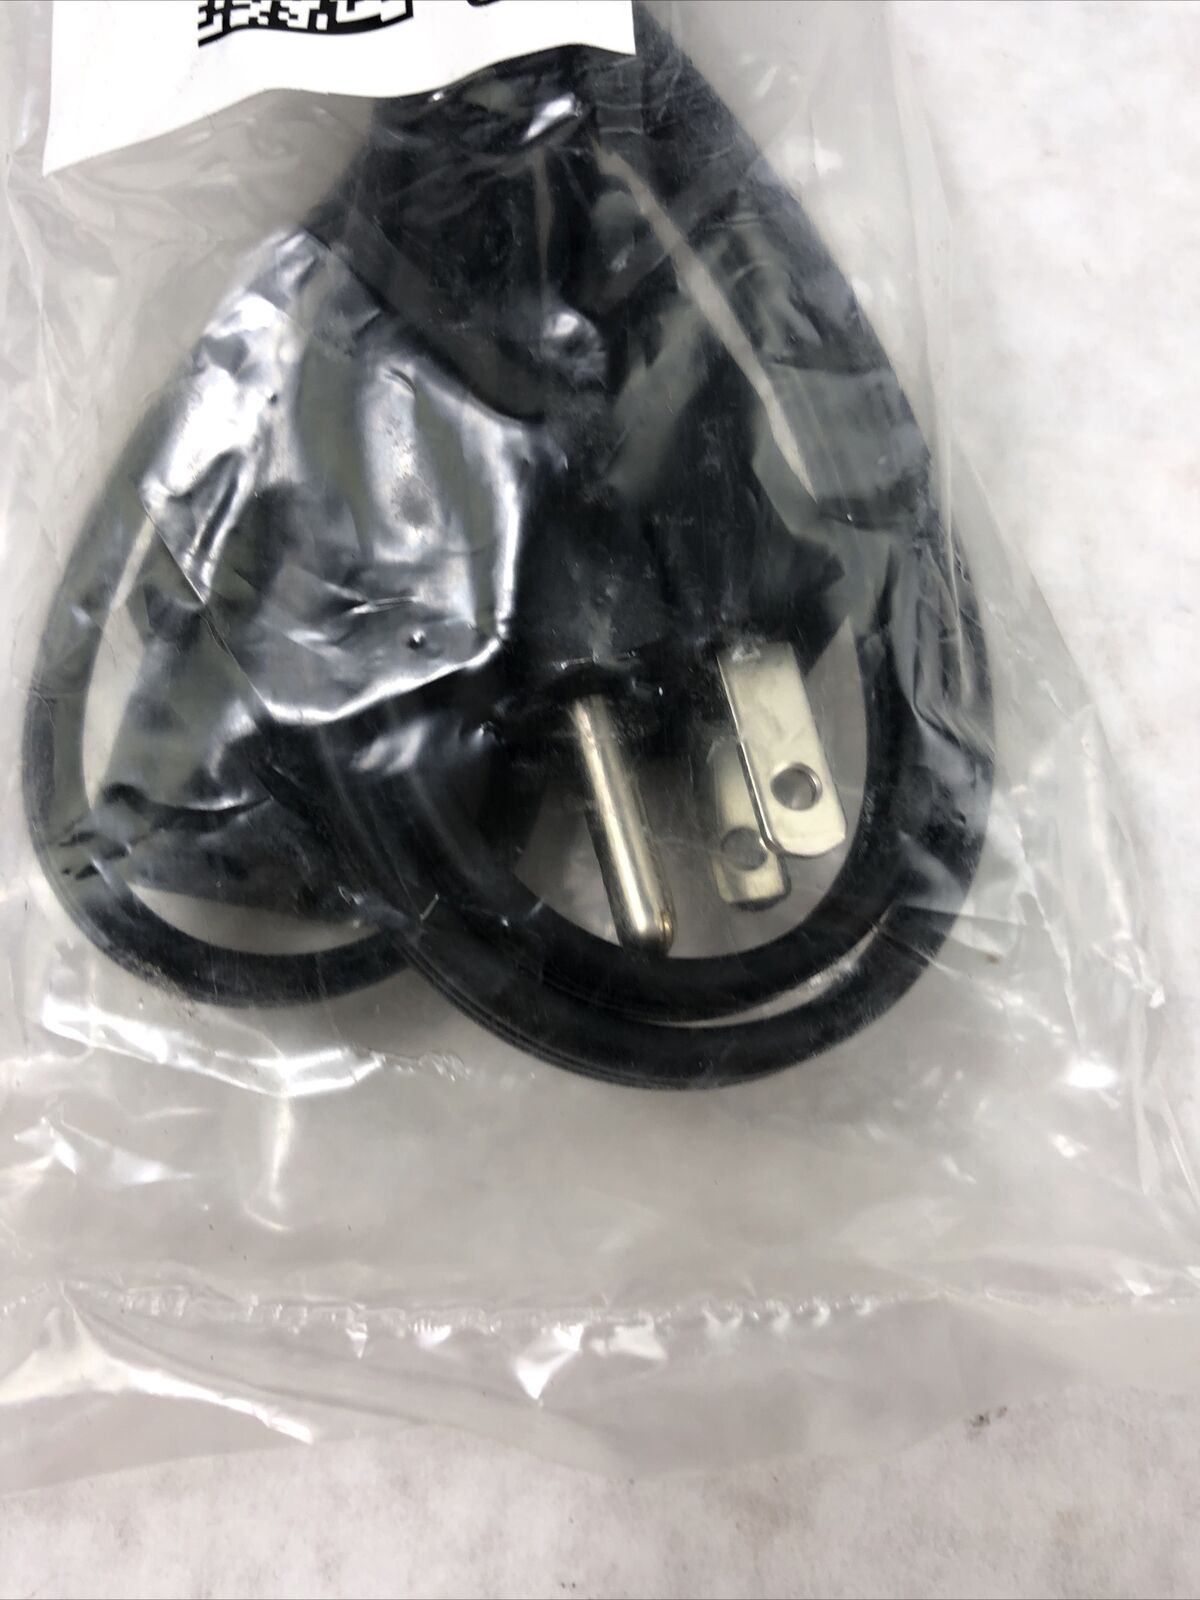 Lot of 10 DELL 05120P Power Cable 6ft w/ Protective Bag - Black